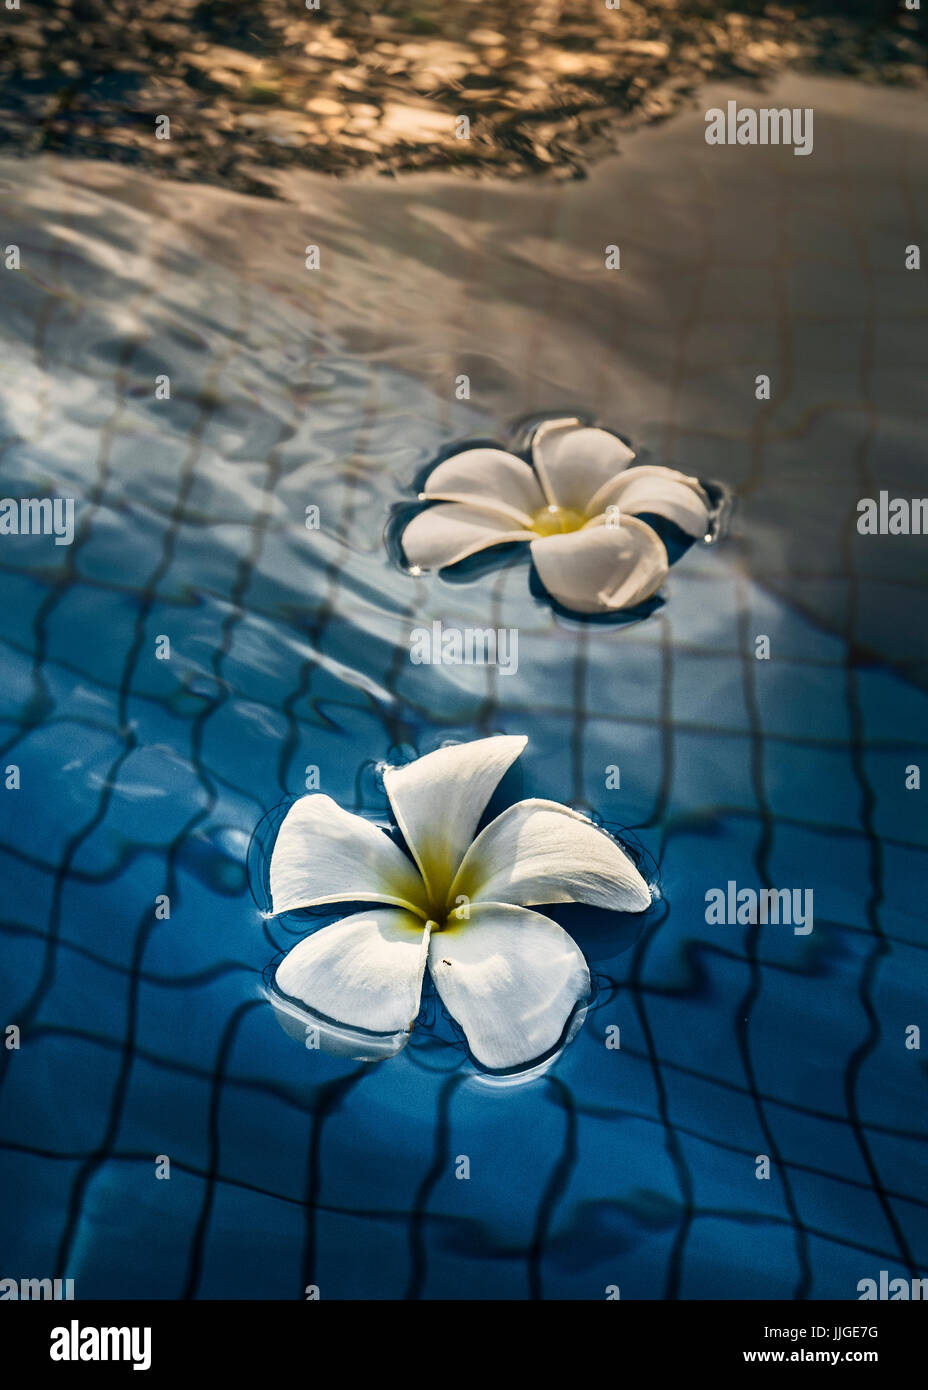 Frangipani flowers floating in a swimming pool Stock Photo